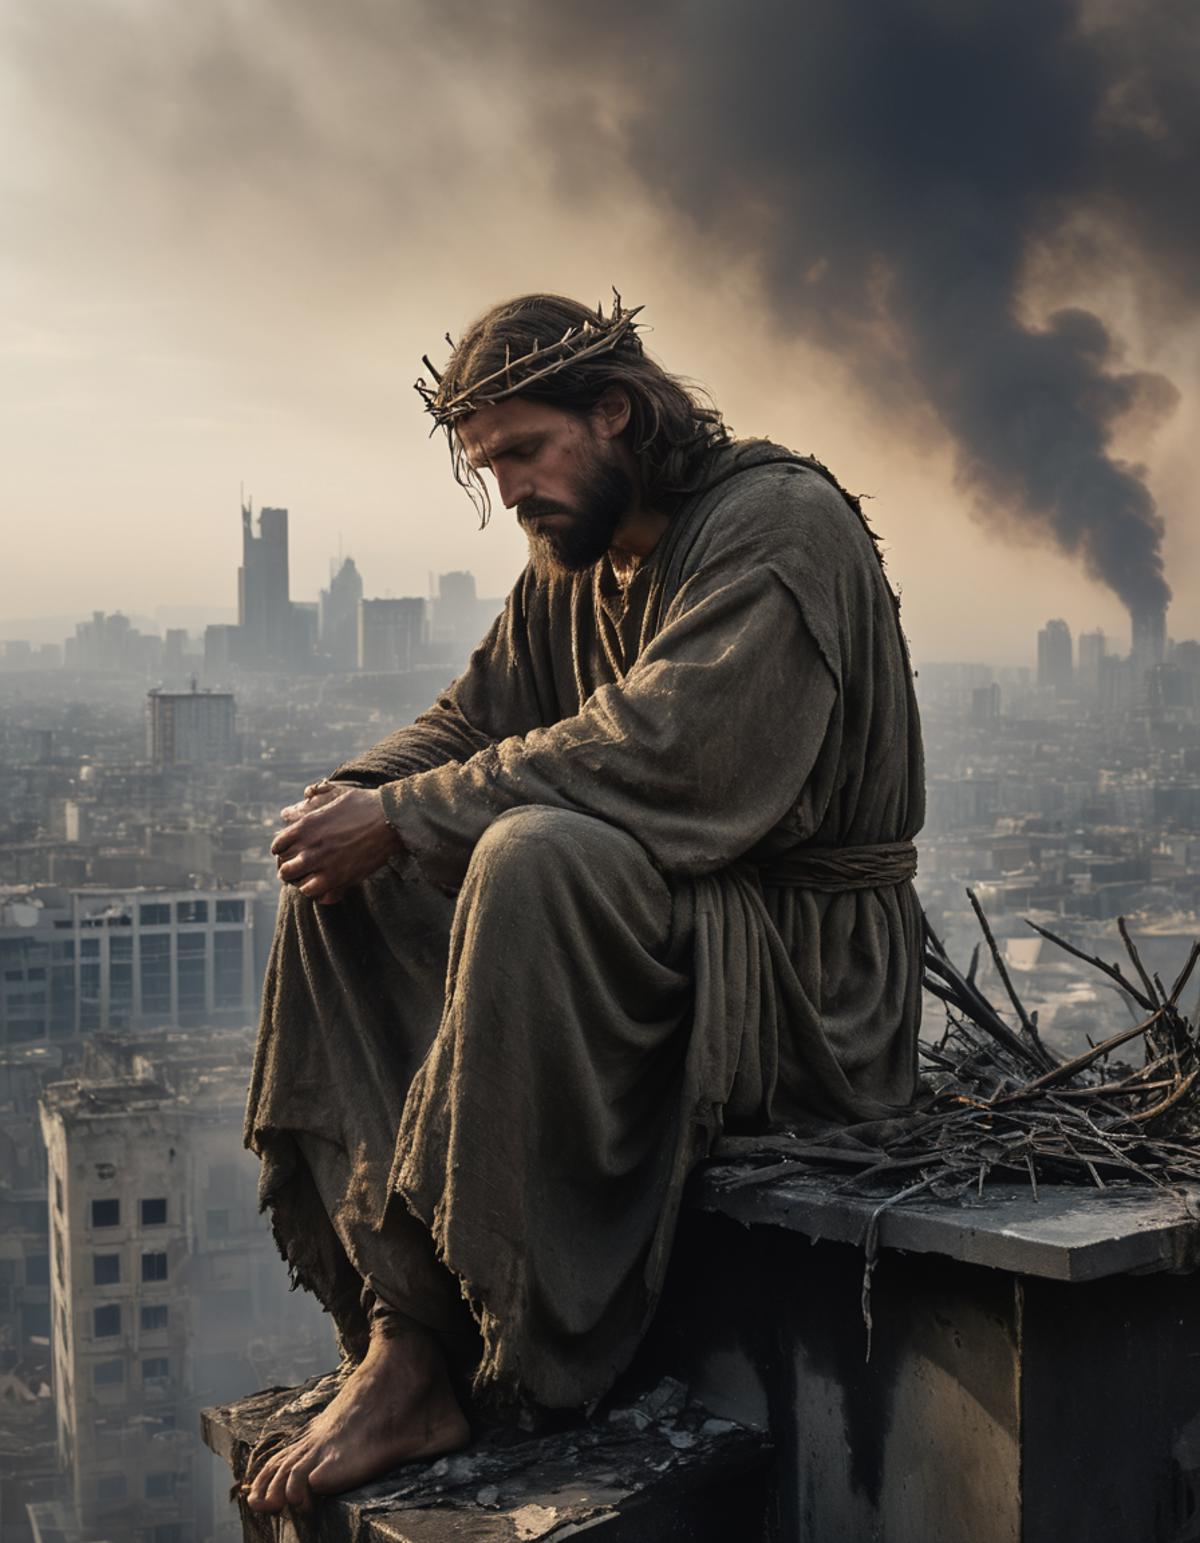 Jesus sitting on a ledge in a cityscape